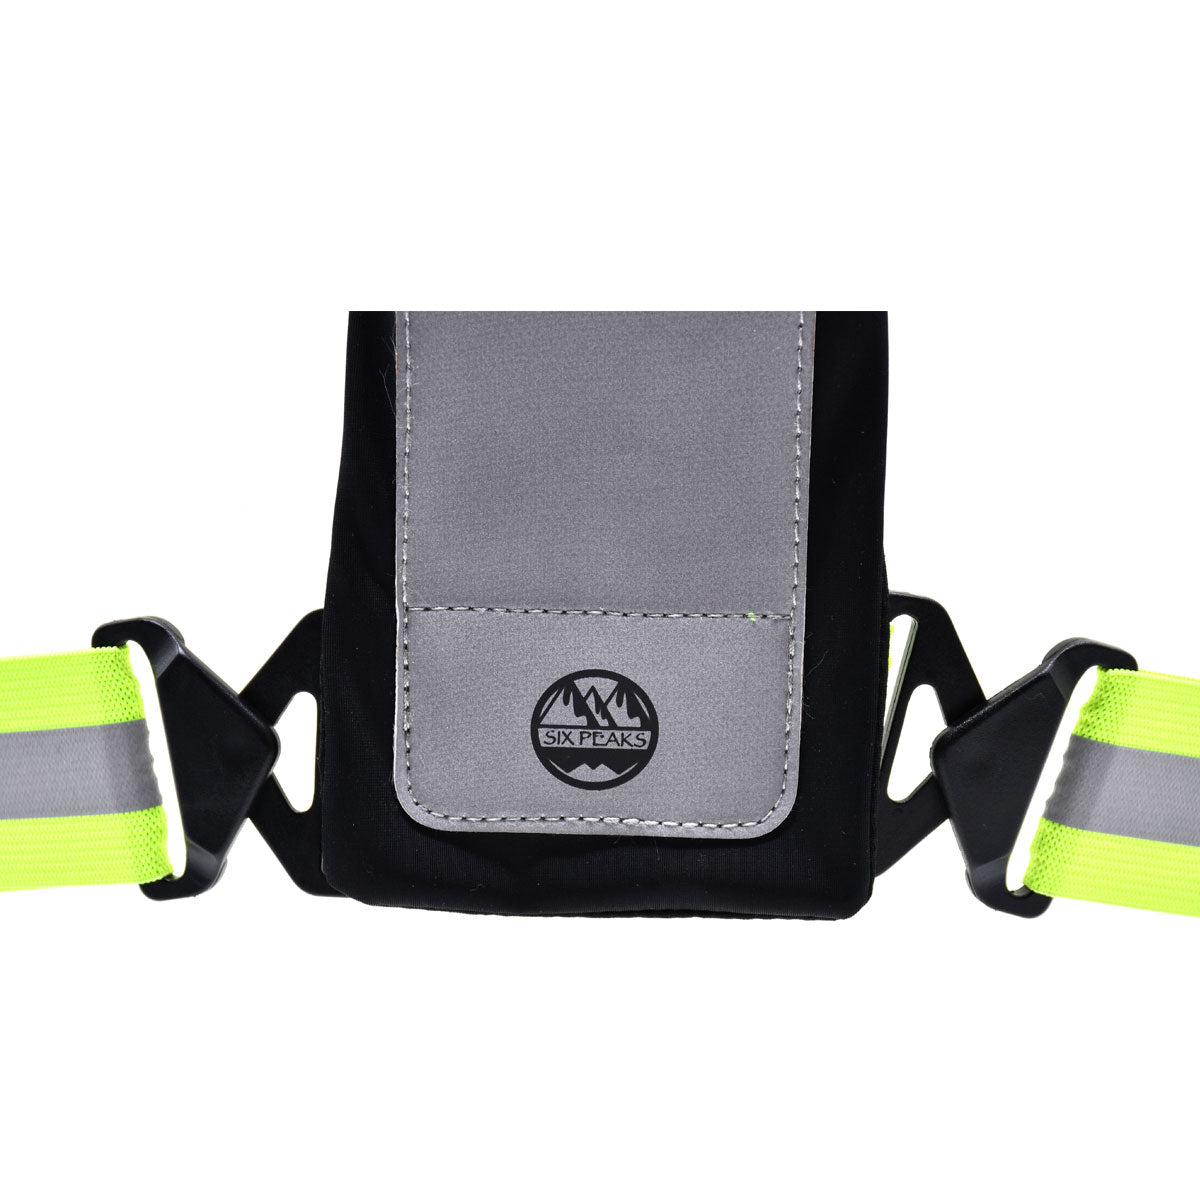 Six Peaks LED Reflective Vest with Phone Holder - Safety Yellow